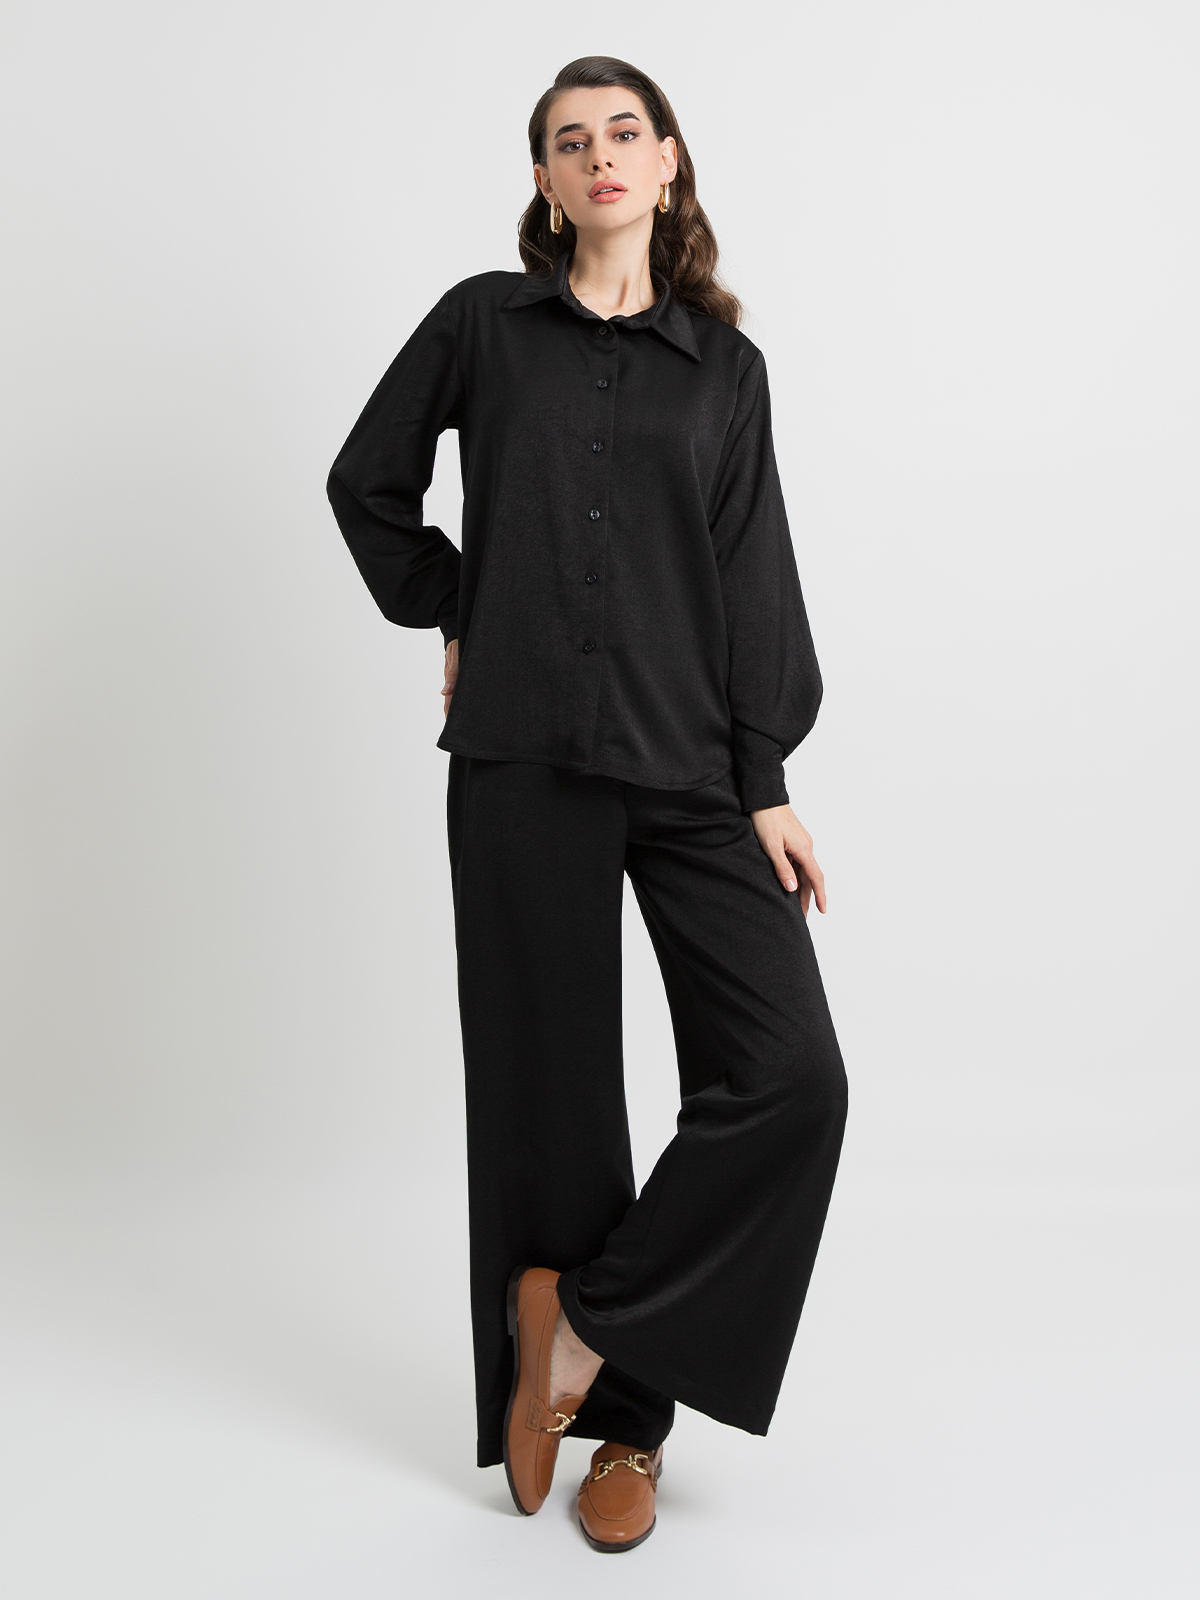 Black - Flared Pants With Reguler-fit Shirt Set in Soft & Silky-feel Fabric